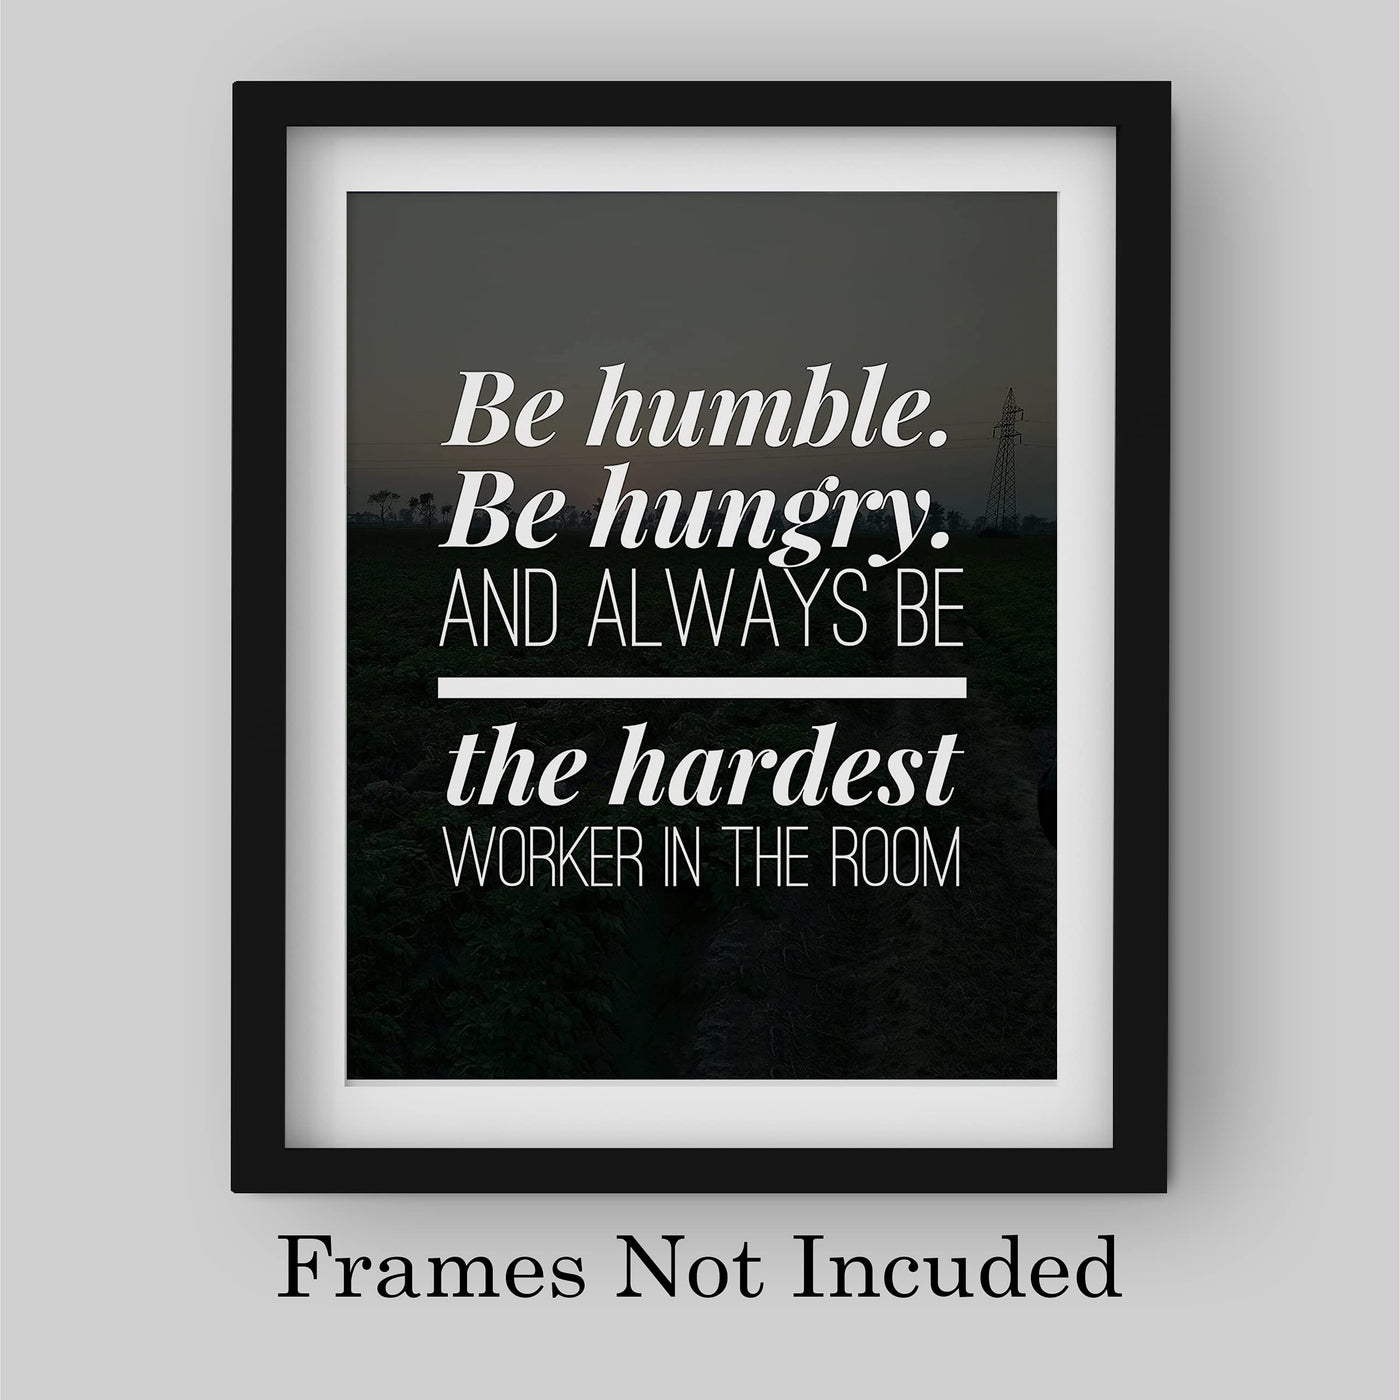 Always Be the Hardest Worker in the Room Motivational Work Decor-8 x 10" Modern Wall Art Print-Ready to Frame. Inspirational Home-Office-School-Gym Decor. Perfect Desk-Cubicle Sign! Great Gift!